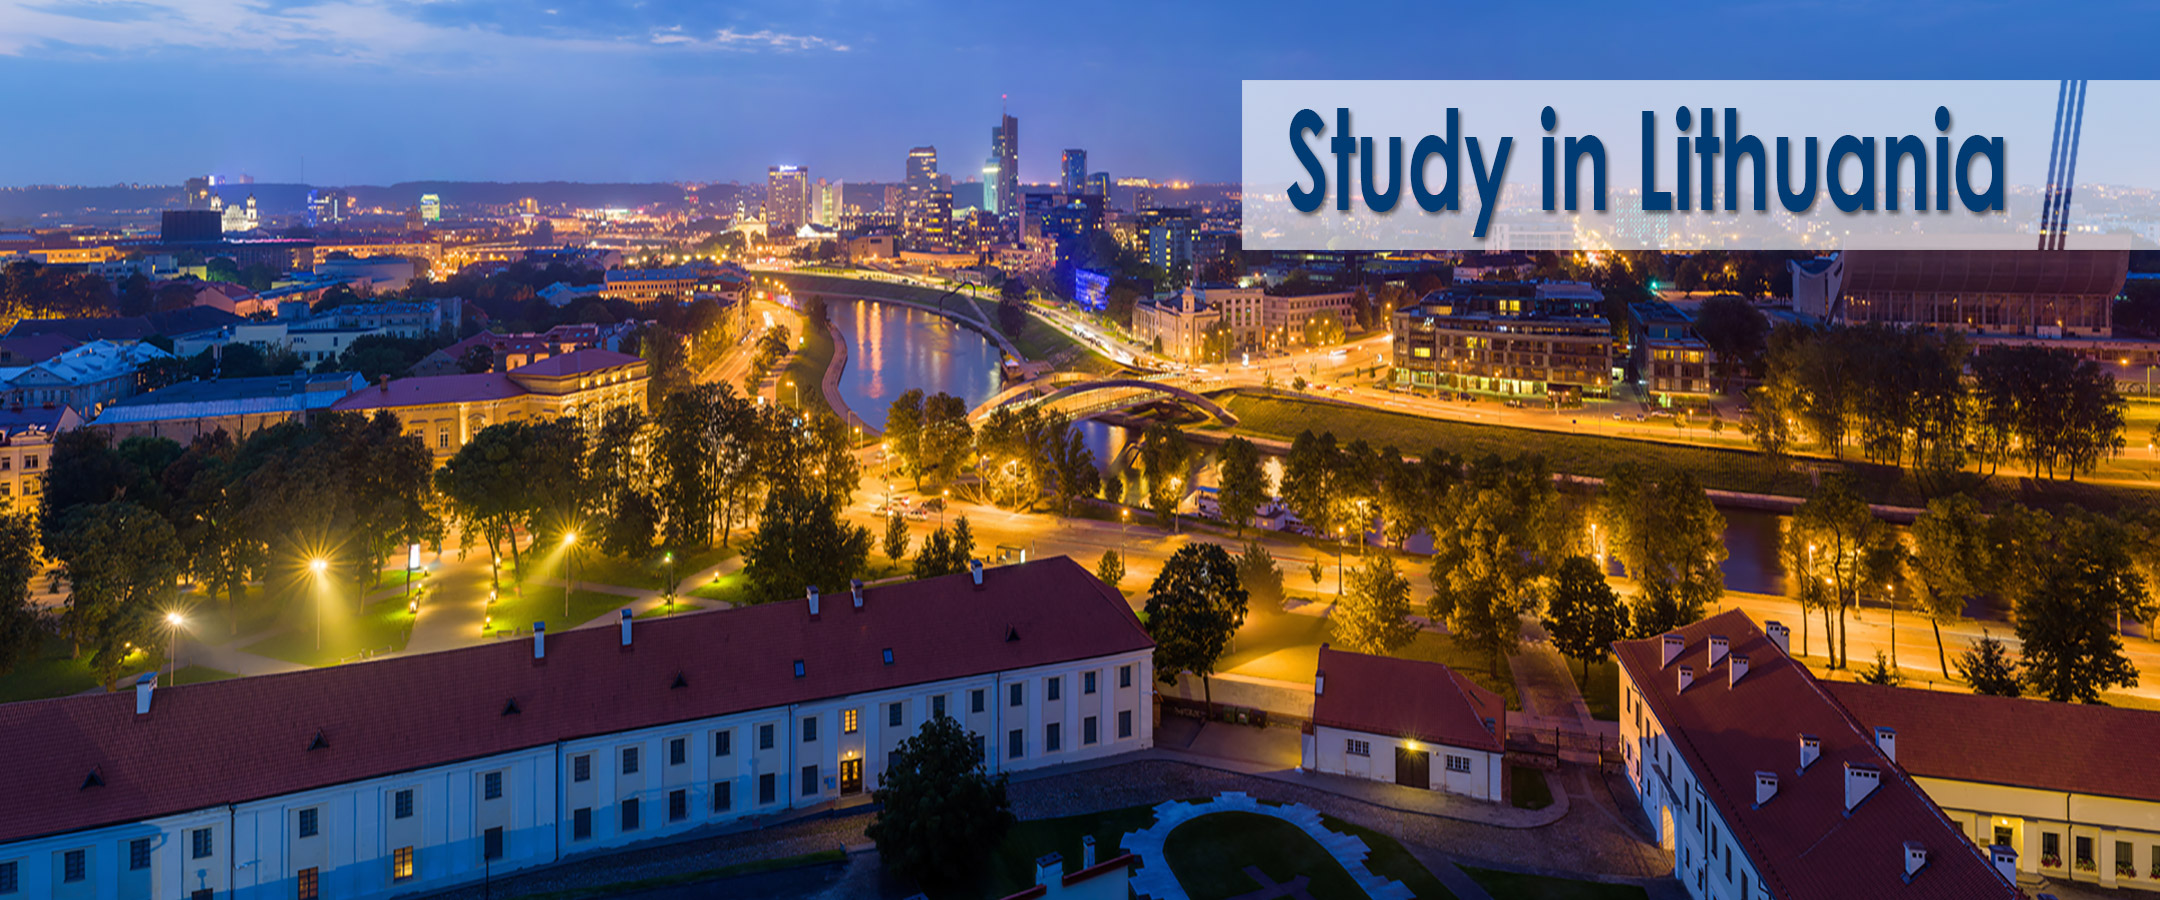 study in lithuania